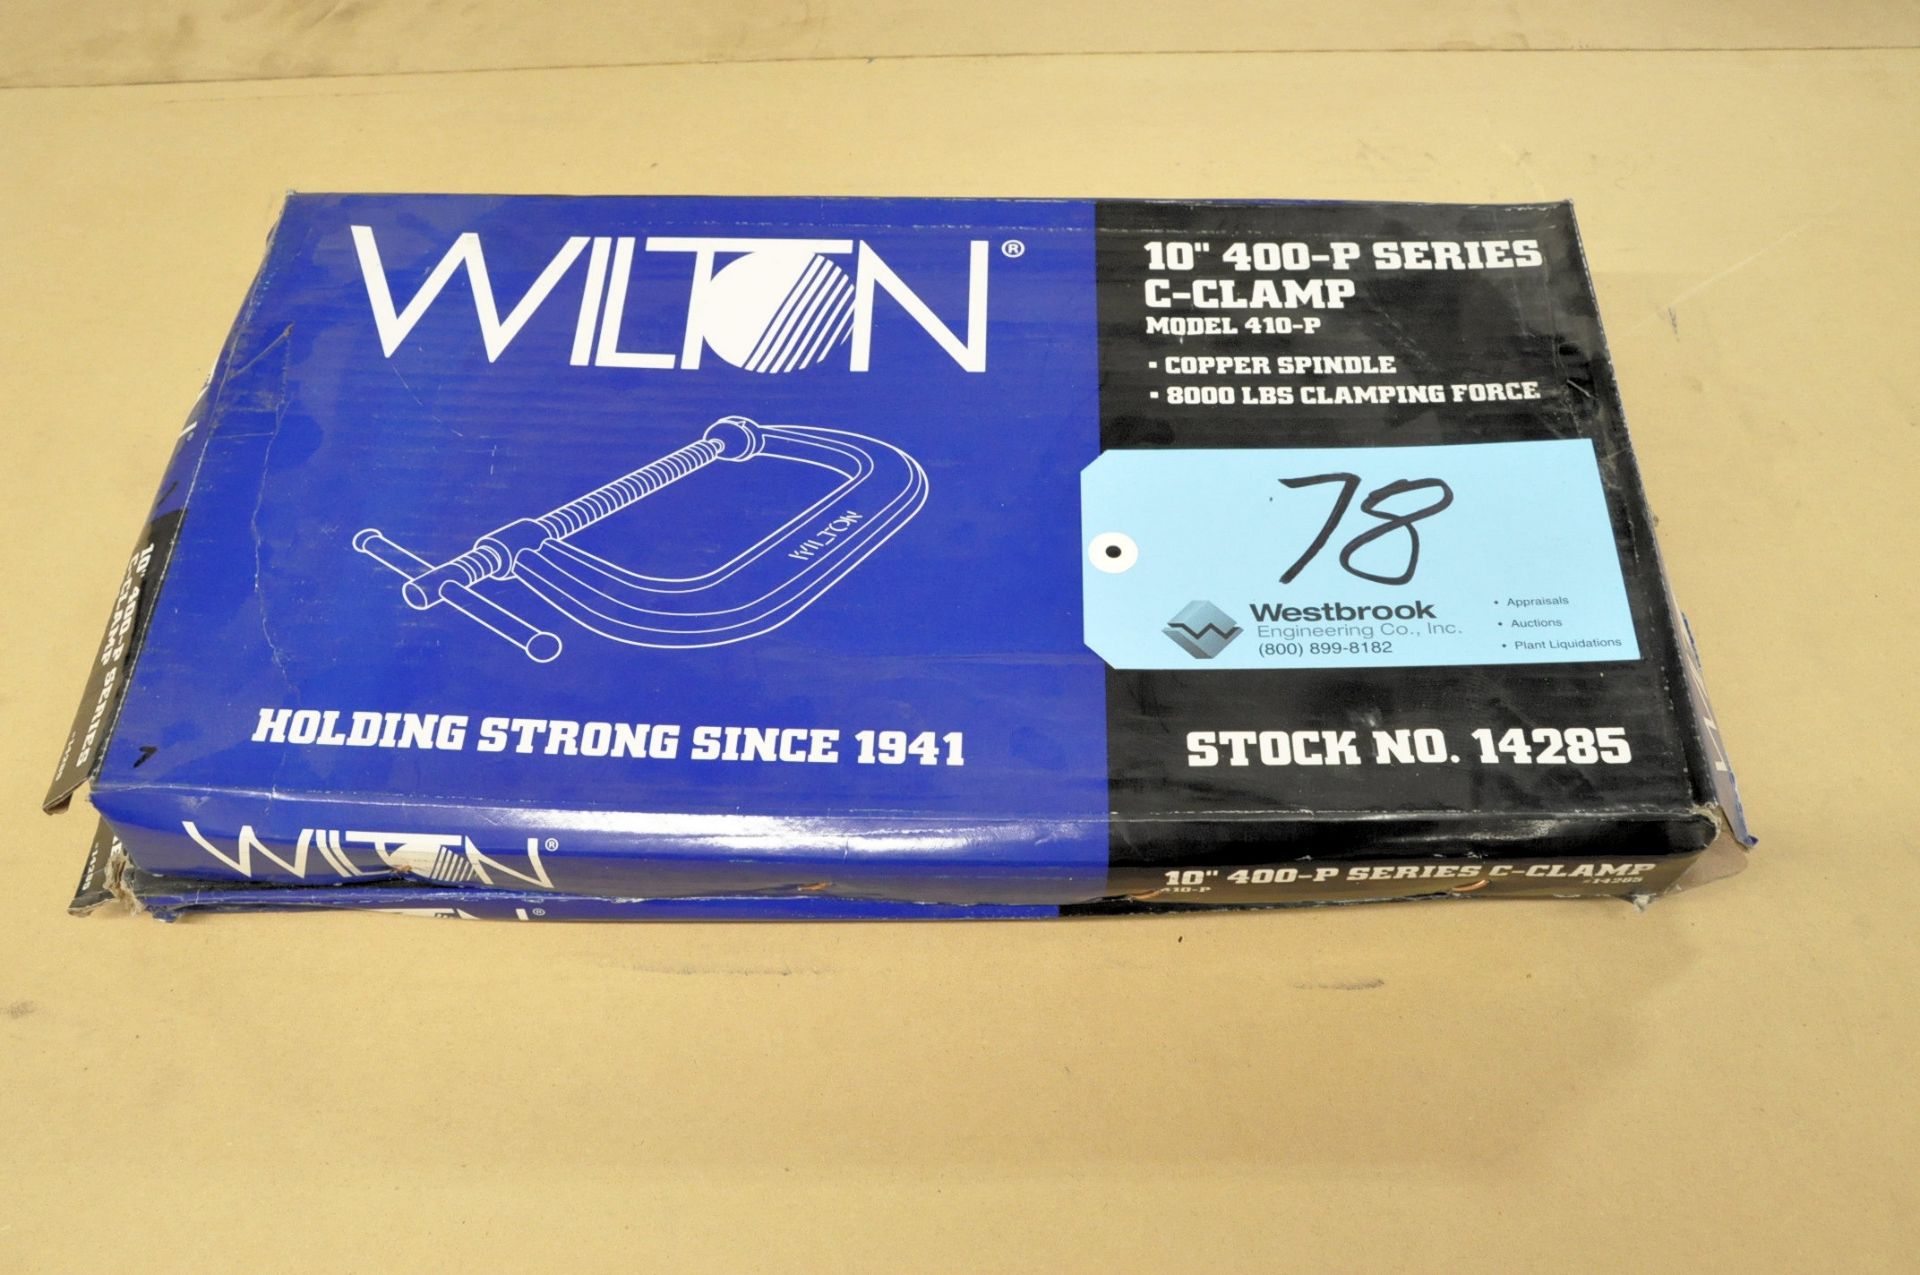 Lot-(2) Wilton No, 410-P, 10" C-Clamps, (Packaged)